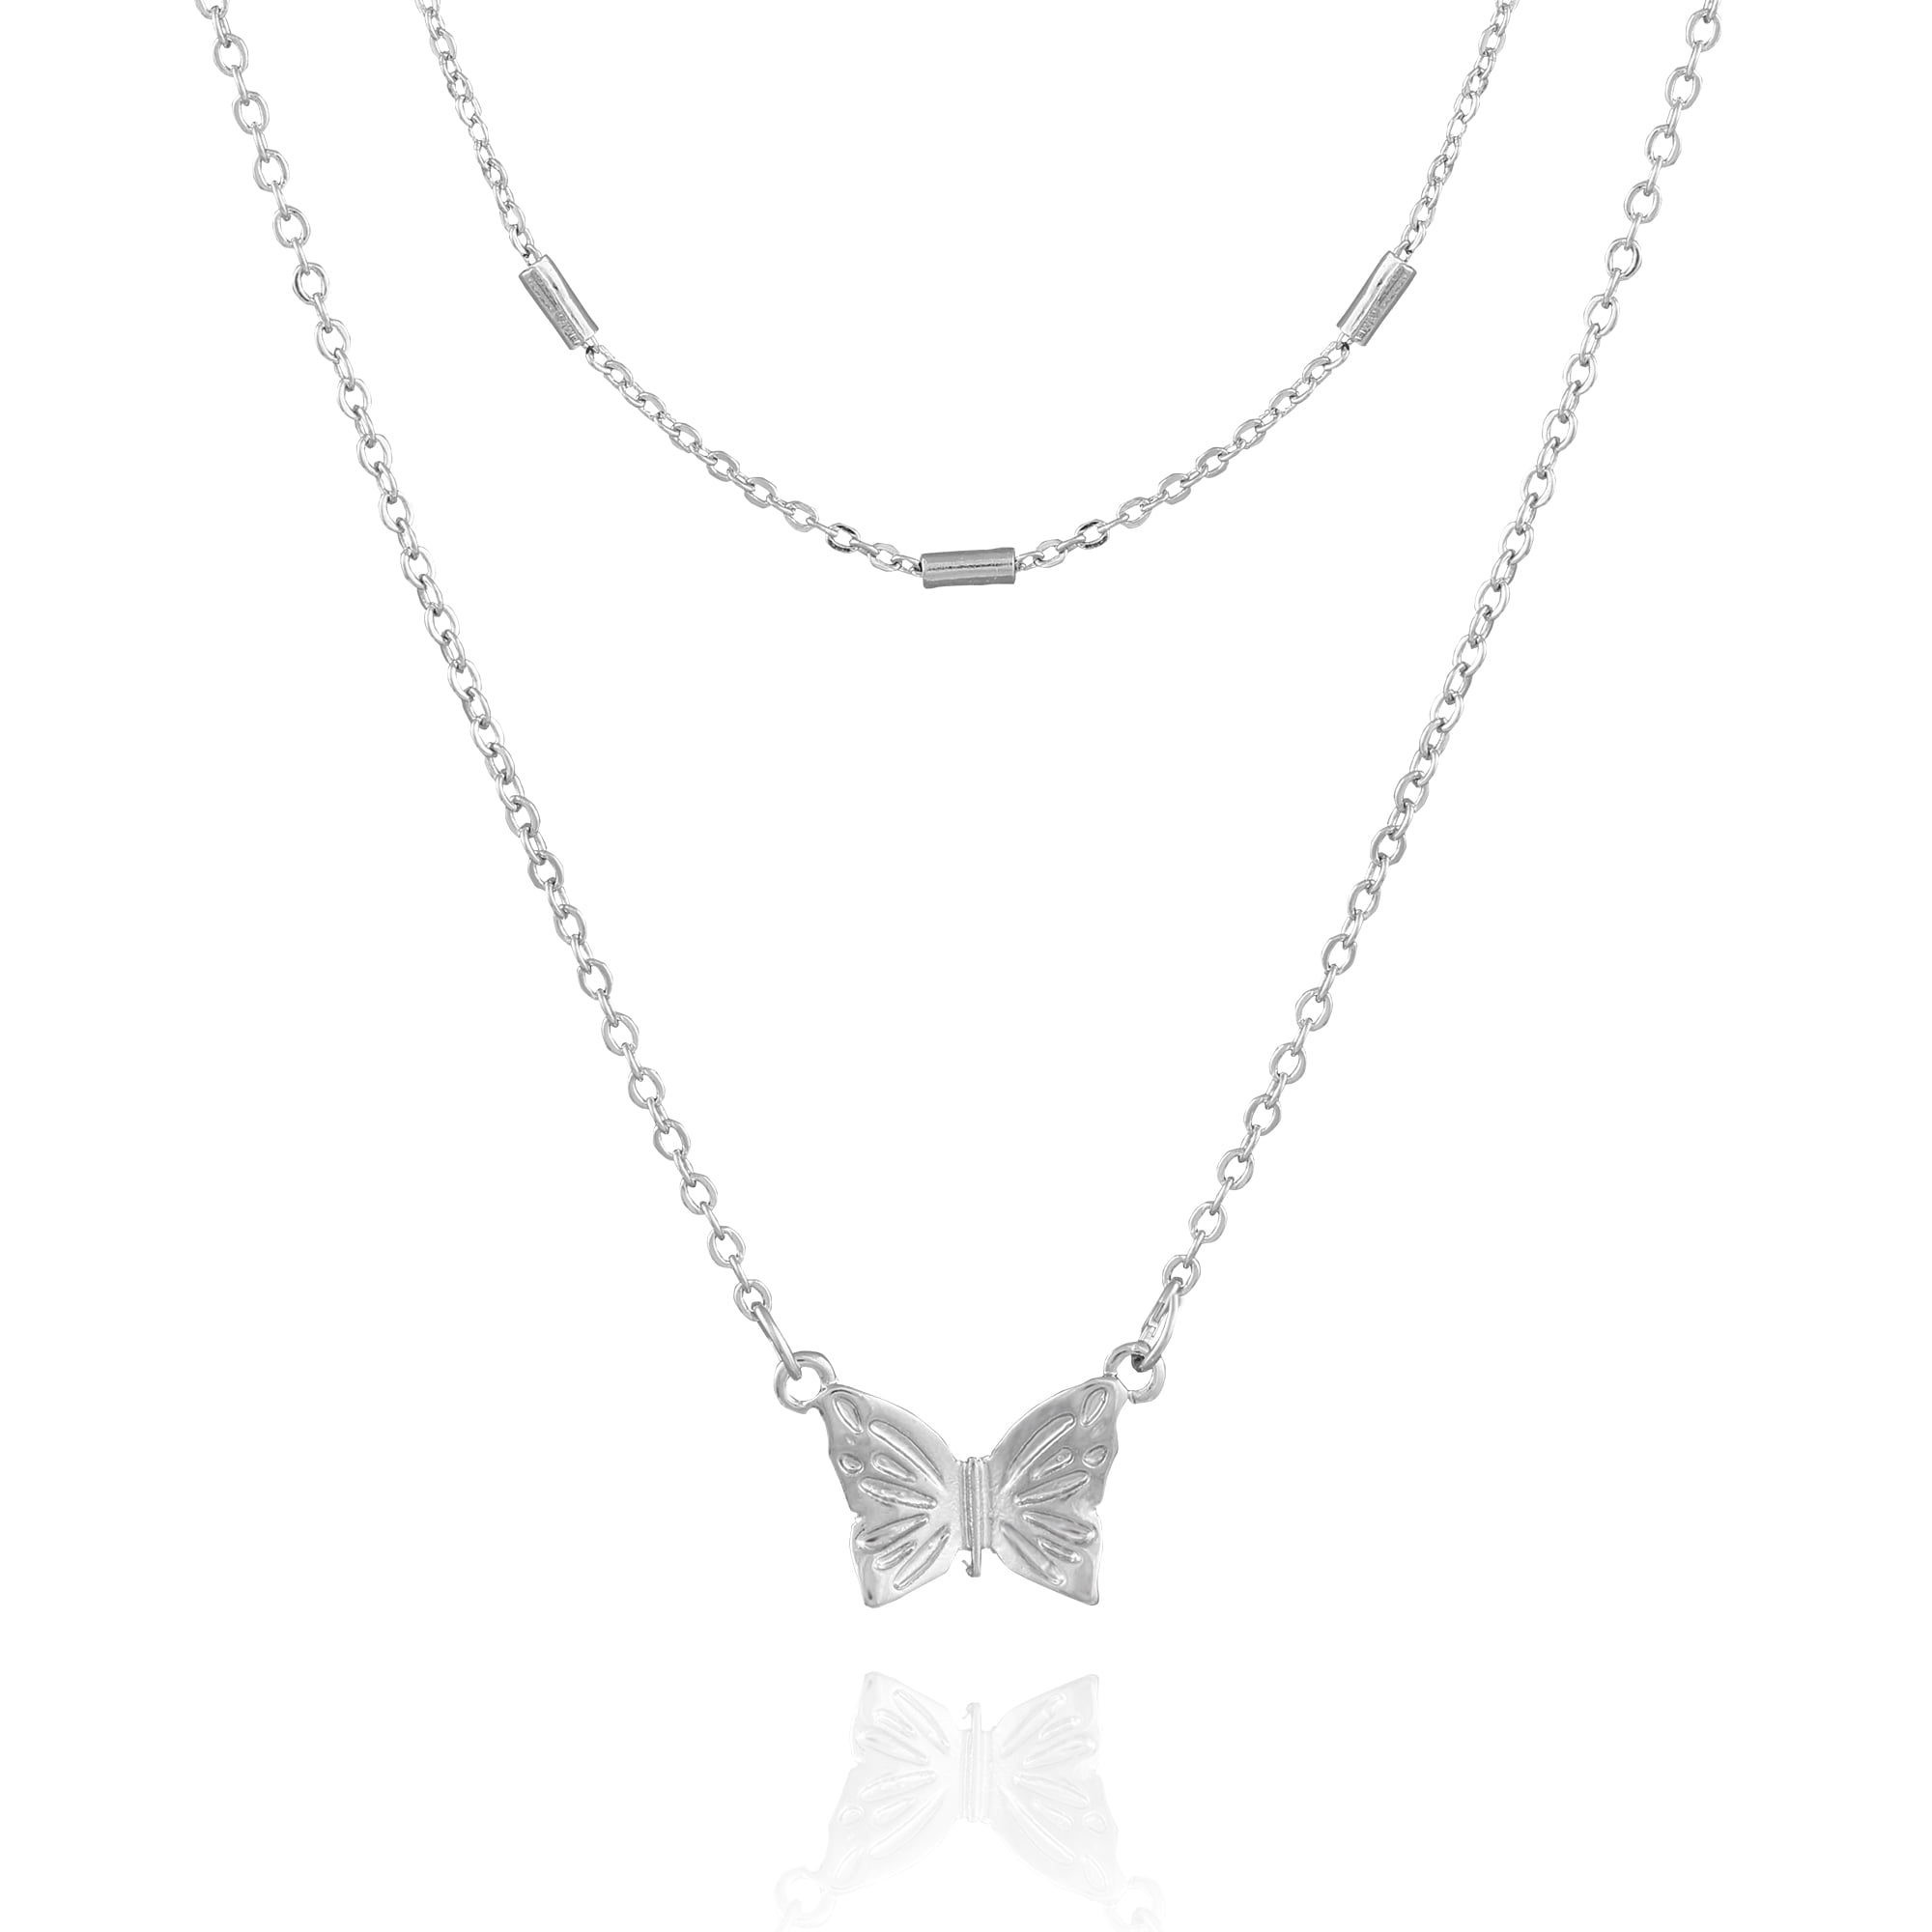 Time and Tru Women's 16" Adjustable Fashion Basic Dainty Layered Metal Butterfly Necklace in Imitation Rhodium.